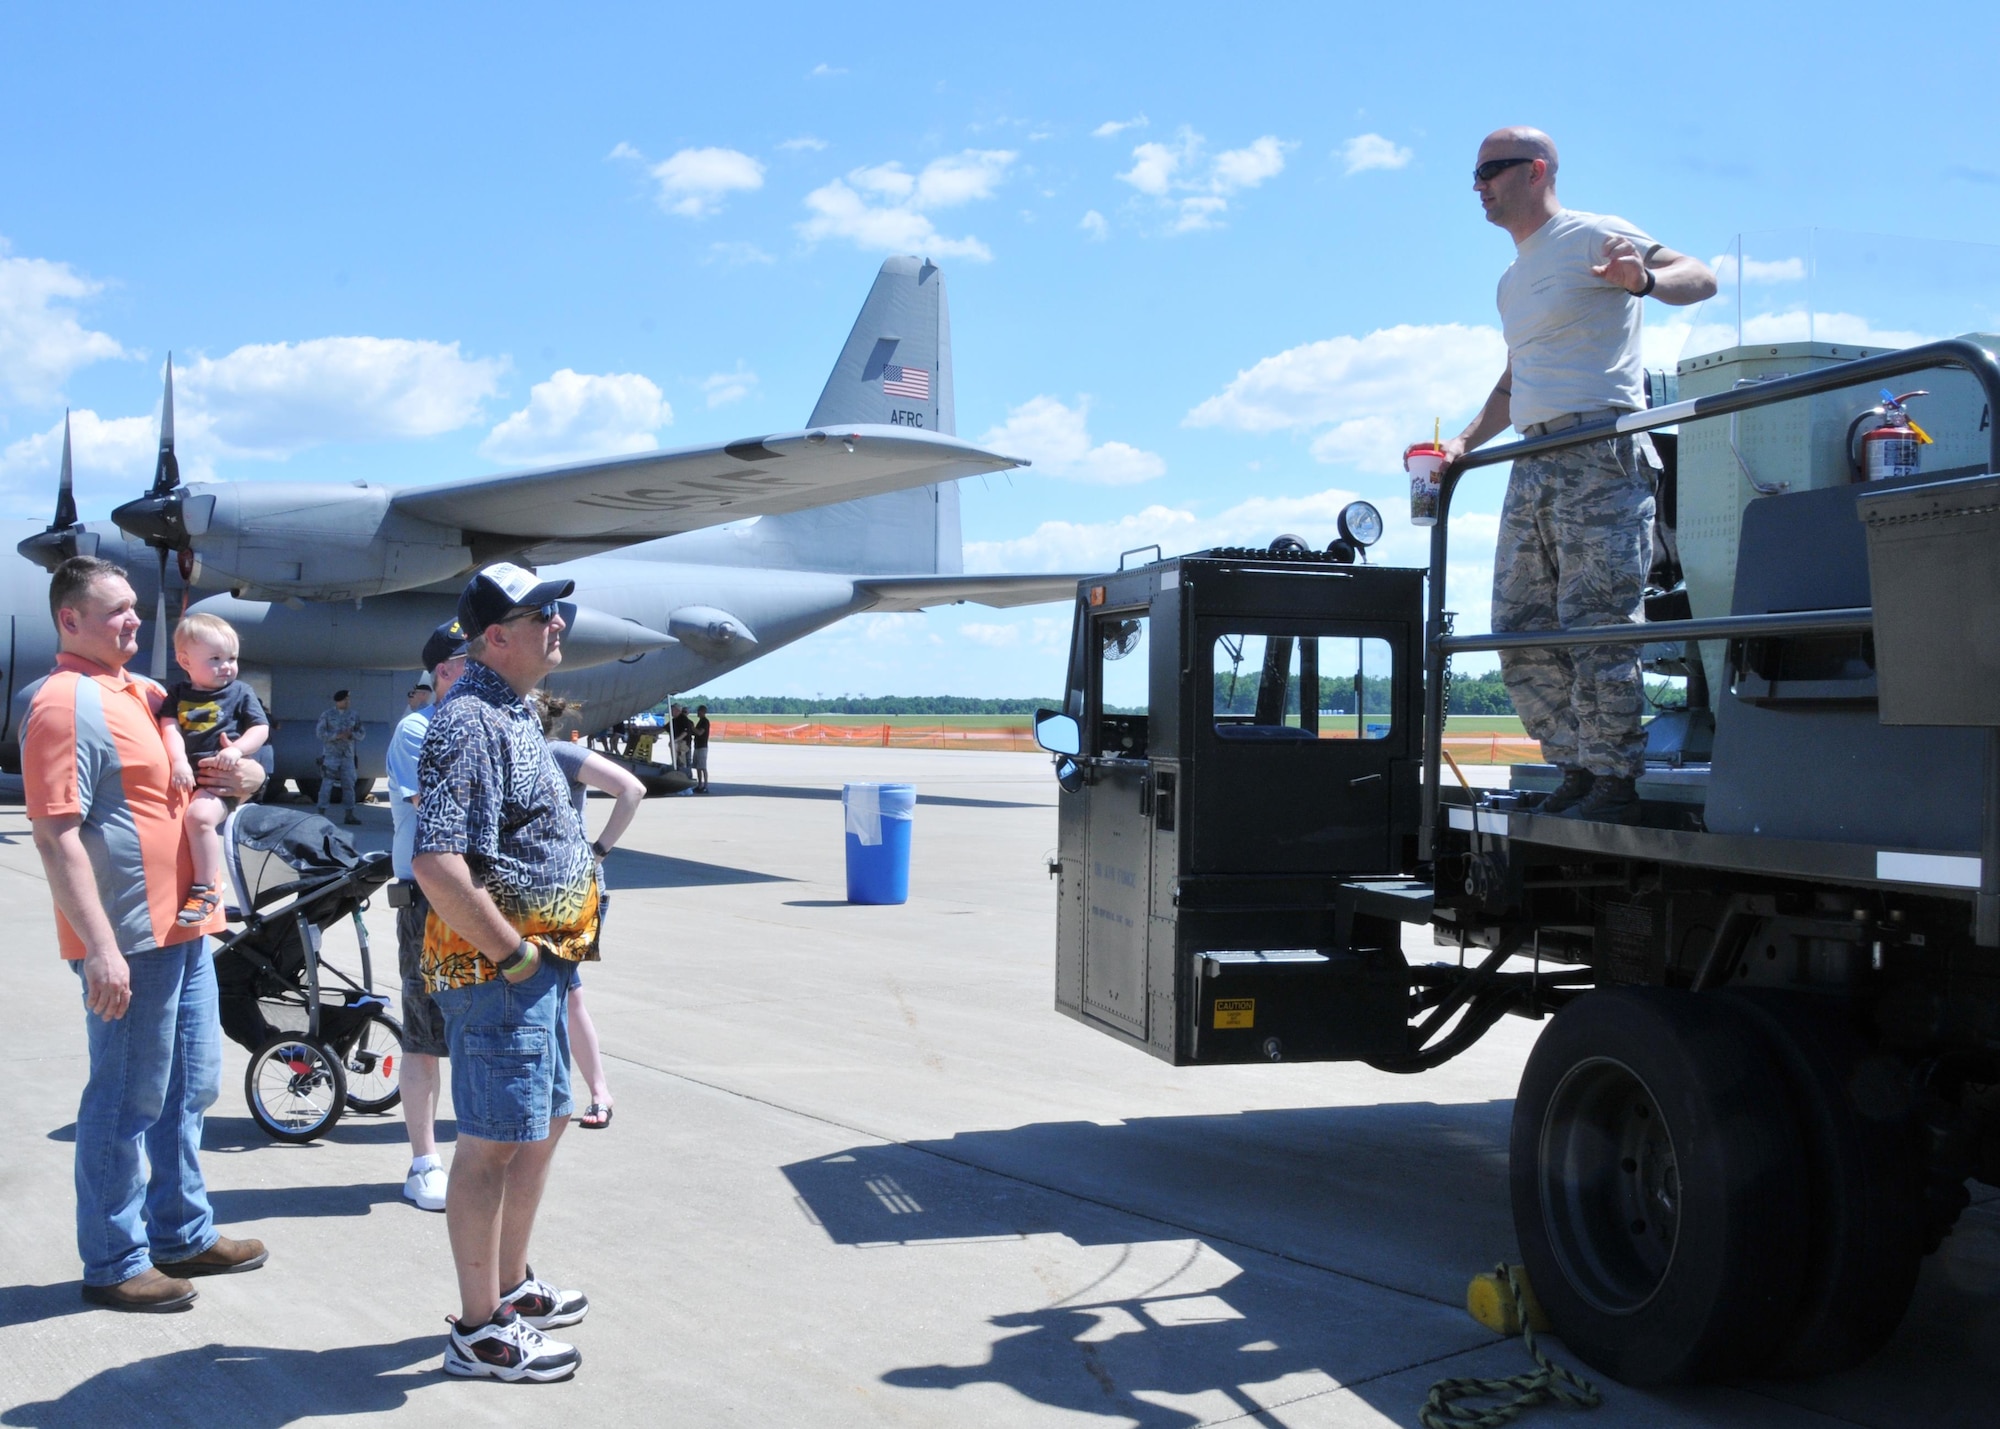 Tech. Sgt. Jeremy Rogers, and aerial spray maintainer with the 910th Maintenance Squadron, explains the components of the Modular Aerial Spray System during the Department of Defense preview day of the 2016 Youngstown Air Reserve Station Open House, here June 17th, 2016. The Youngstown Air Reserve Station Open House drew approximately 7000 guests to see the equipment, mission and personnel of YARS. The preview day was intended to allow DoD card holders and their family members early access to the event. (U.S. Air Force photo/Staff Sgt. Rachel Kocin)